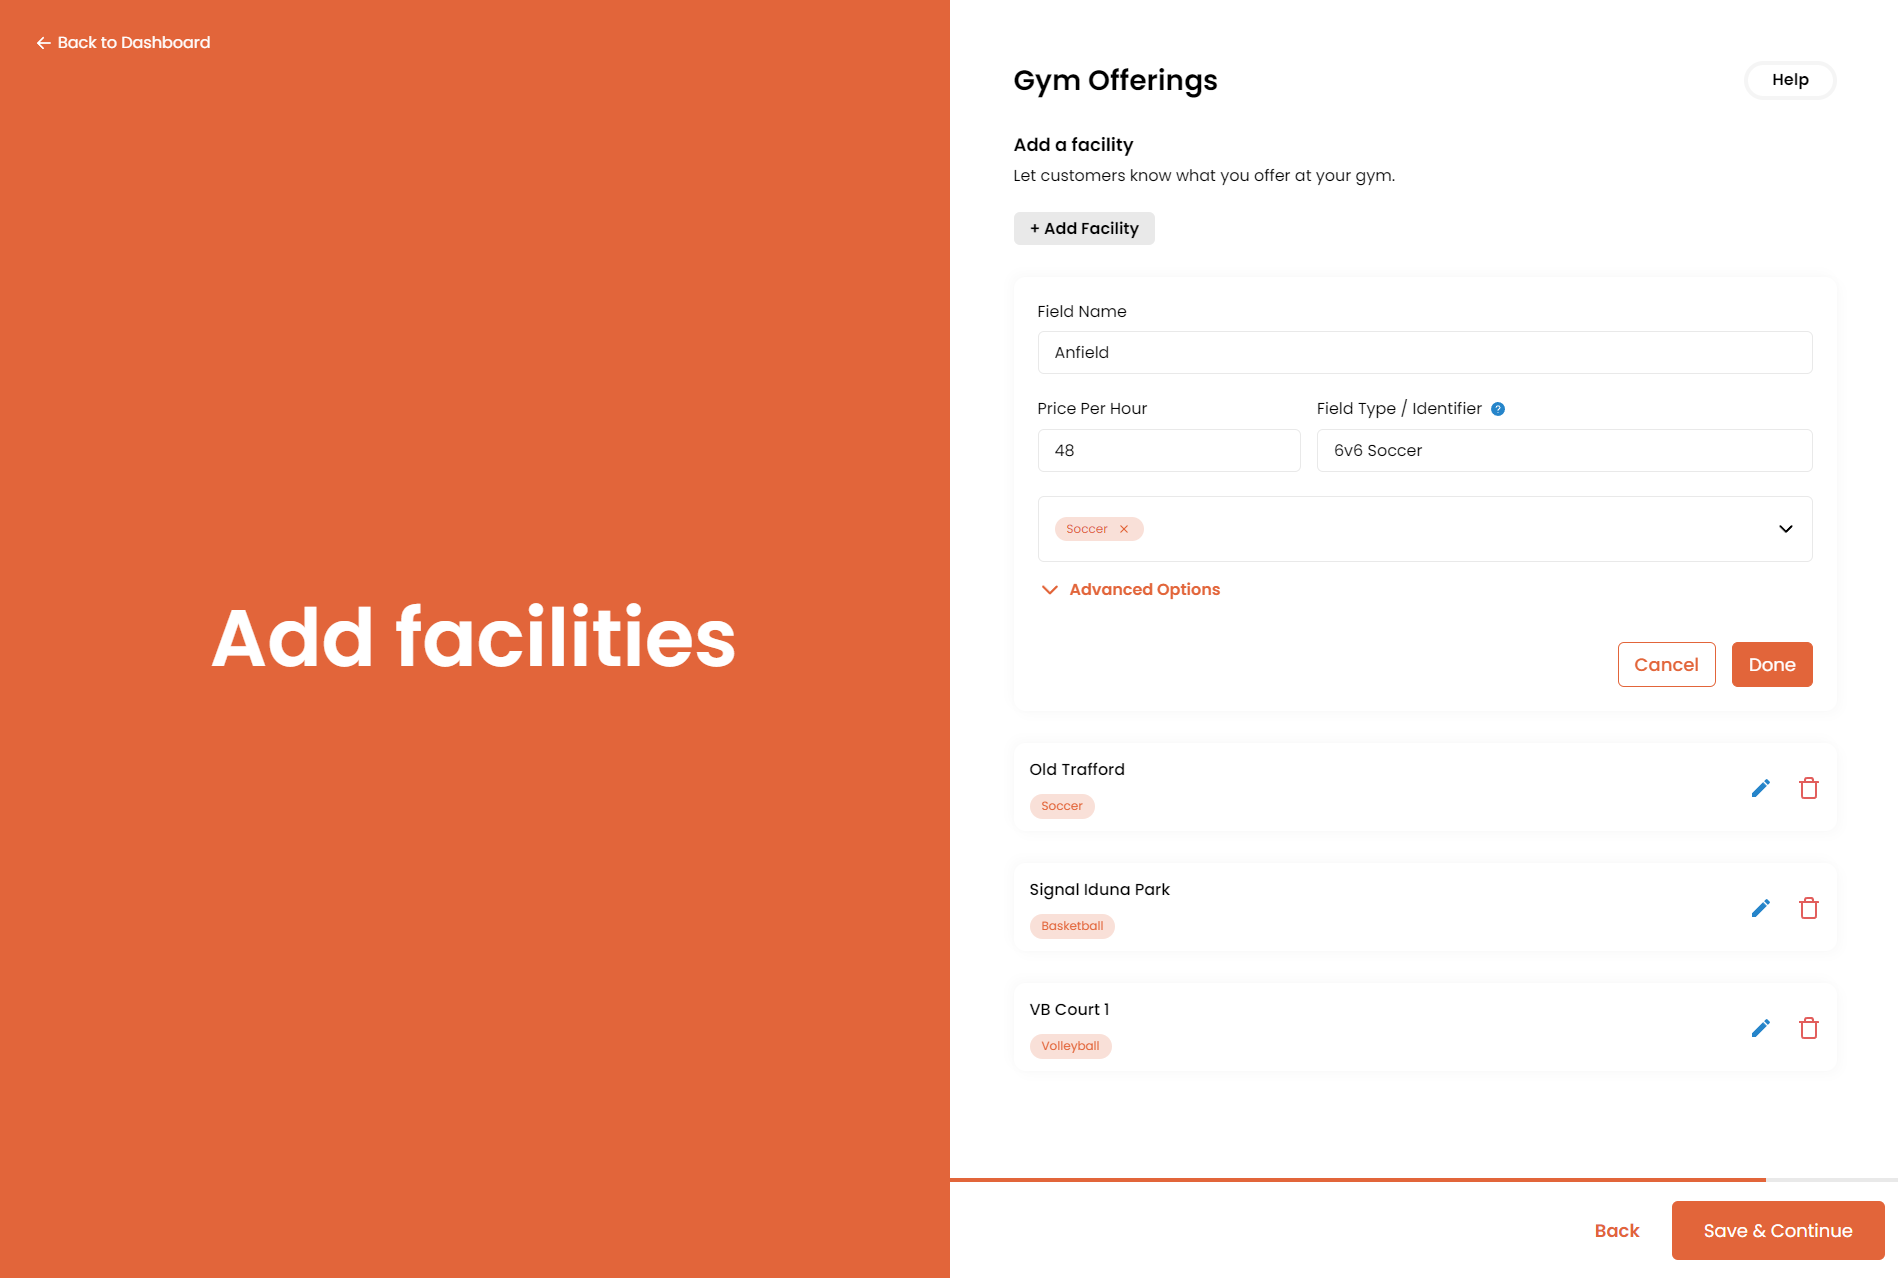 List fields/facilities your gym offers.